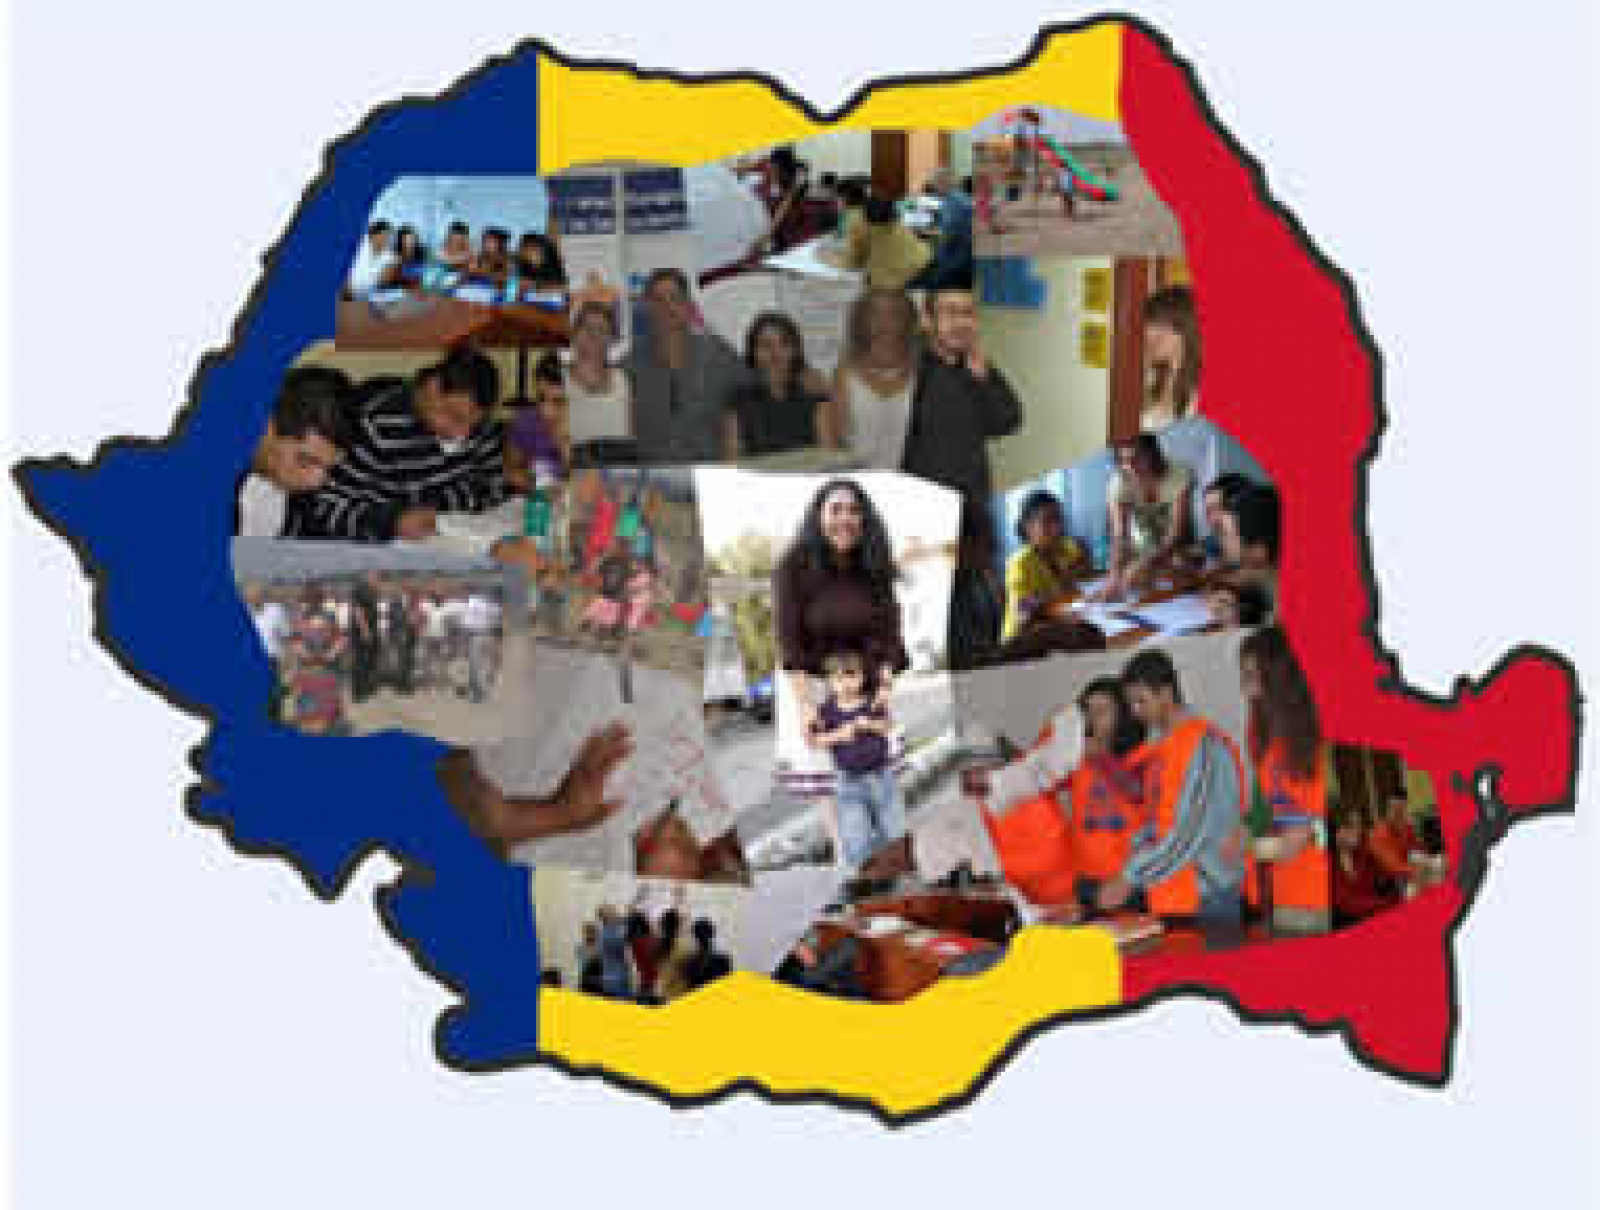 Progress Made but Obstacles Remain to Roma Political Participation in Romania